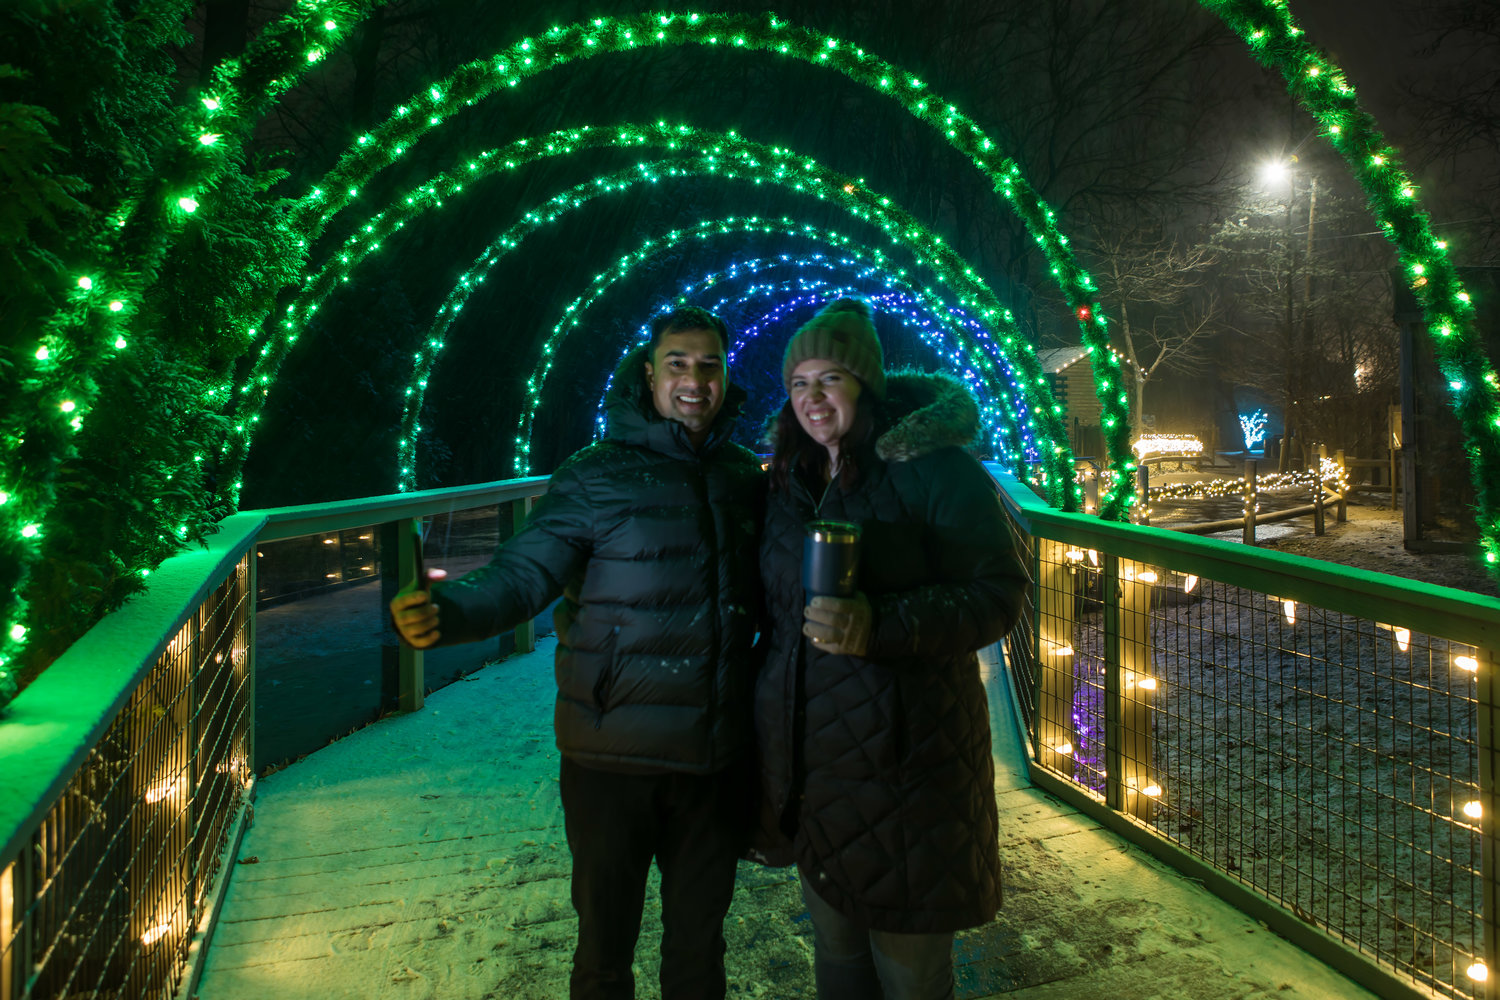 The Potter Park Zoo Wonderland of Lights event is celebrating its 30th year.